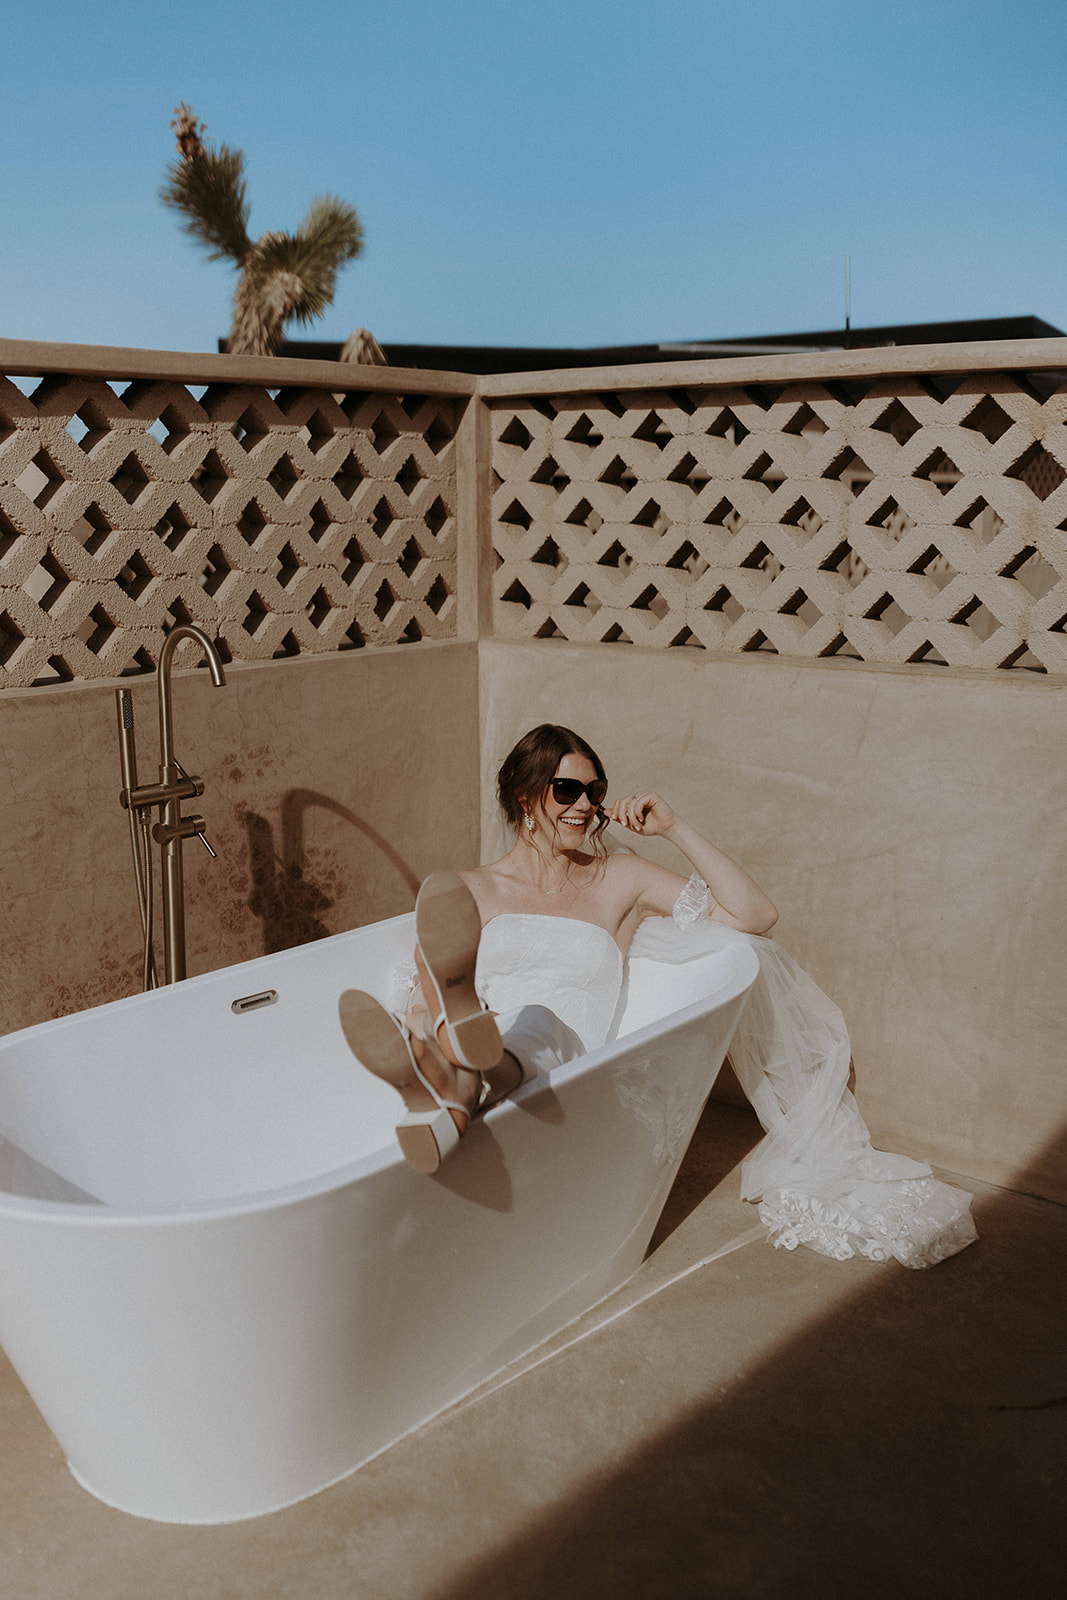 A bride wearing sunglasses in an outdoor bathtub at a luxury boho airbnb in Joshua Tree.